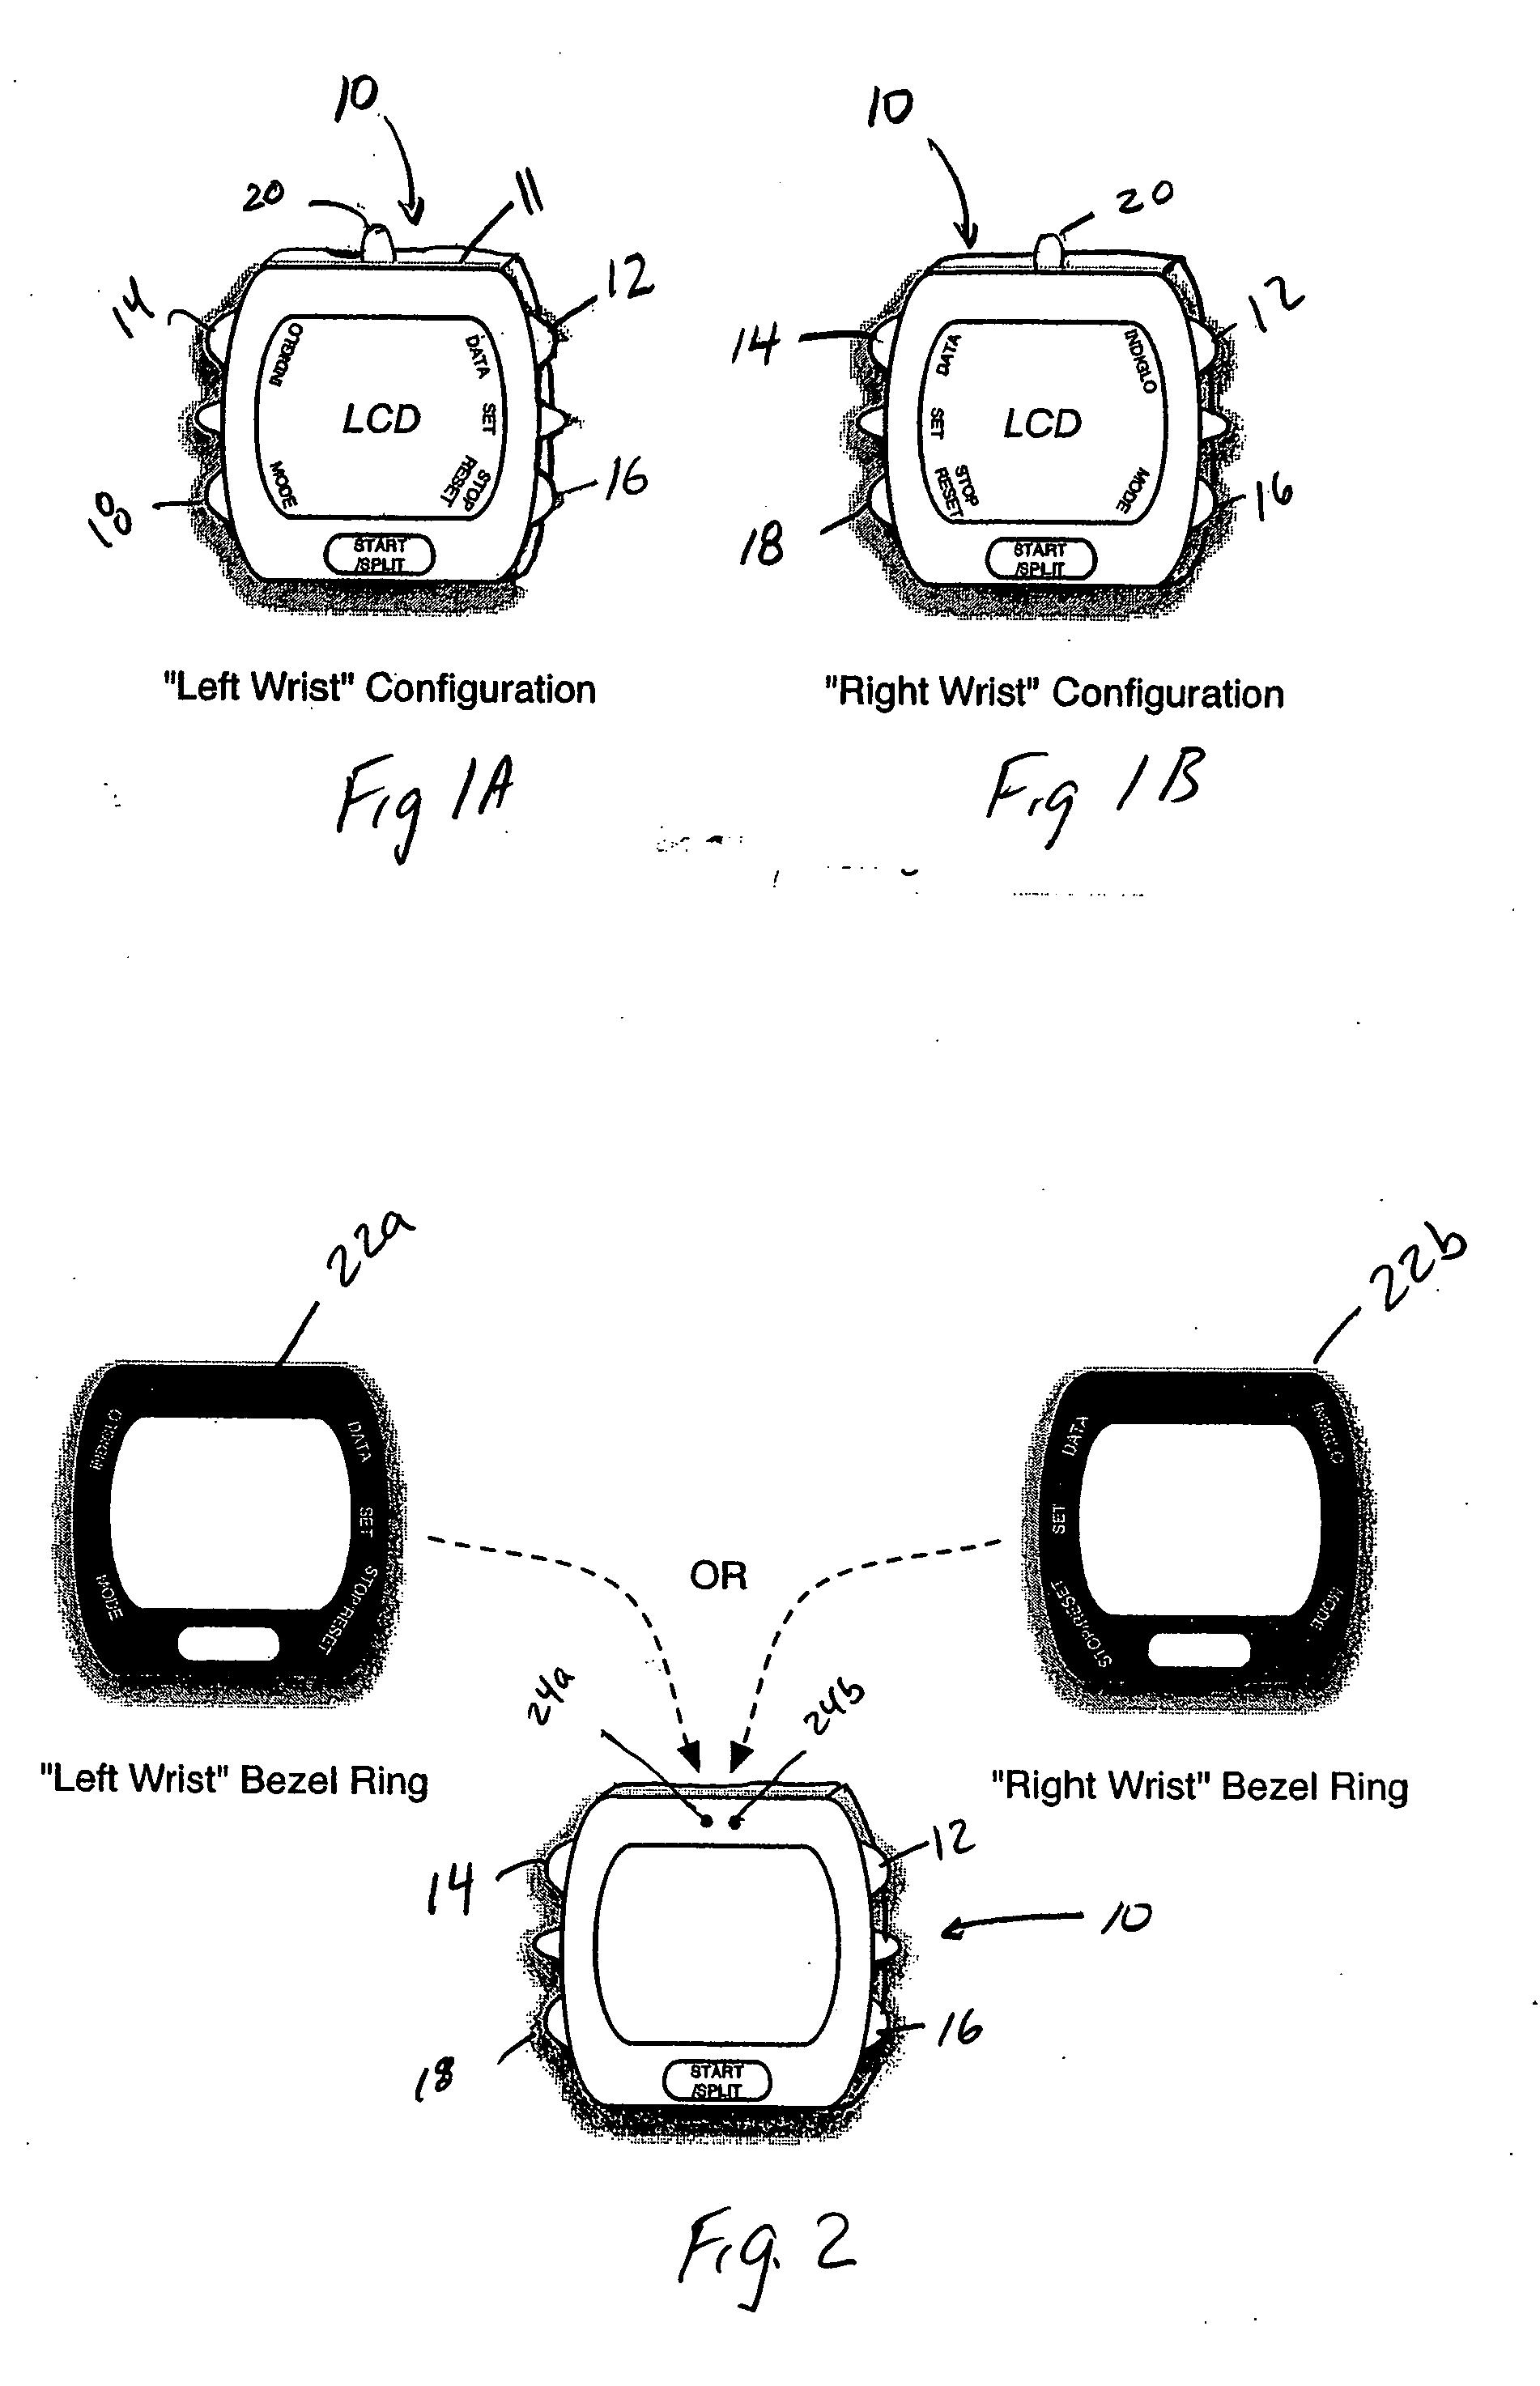 System and method for modifying button functionality